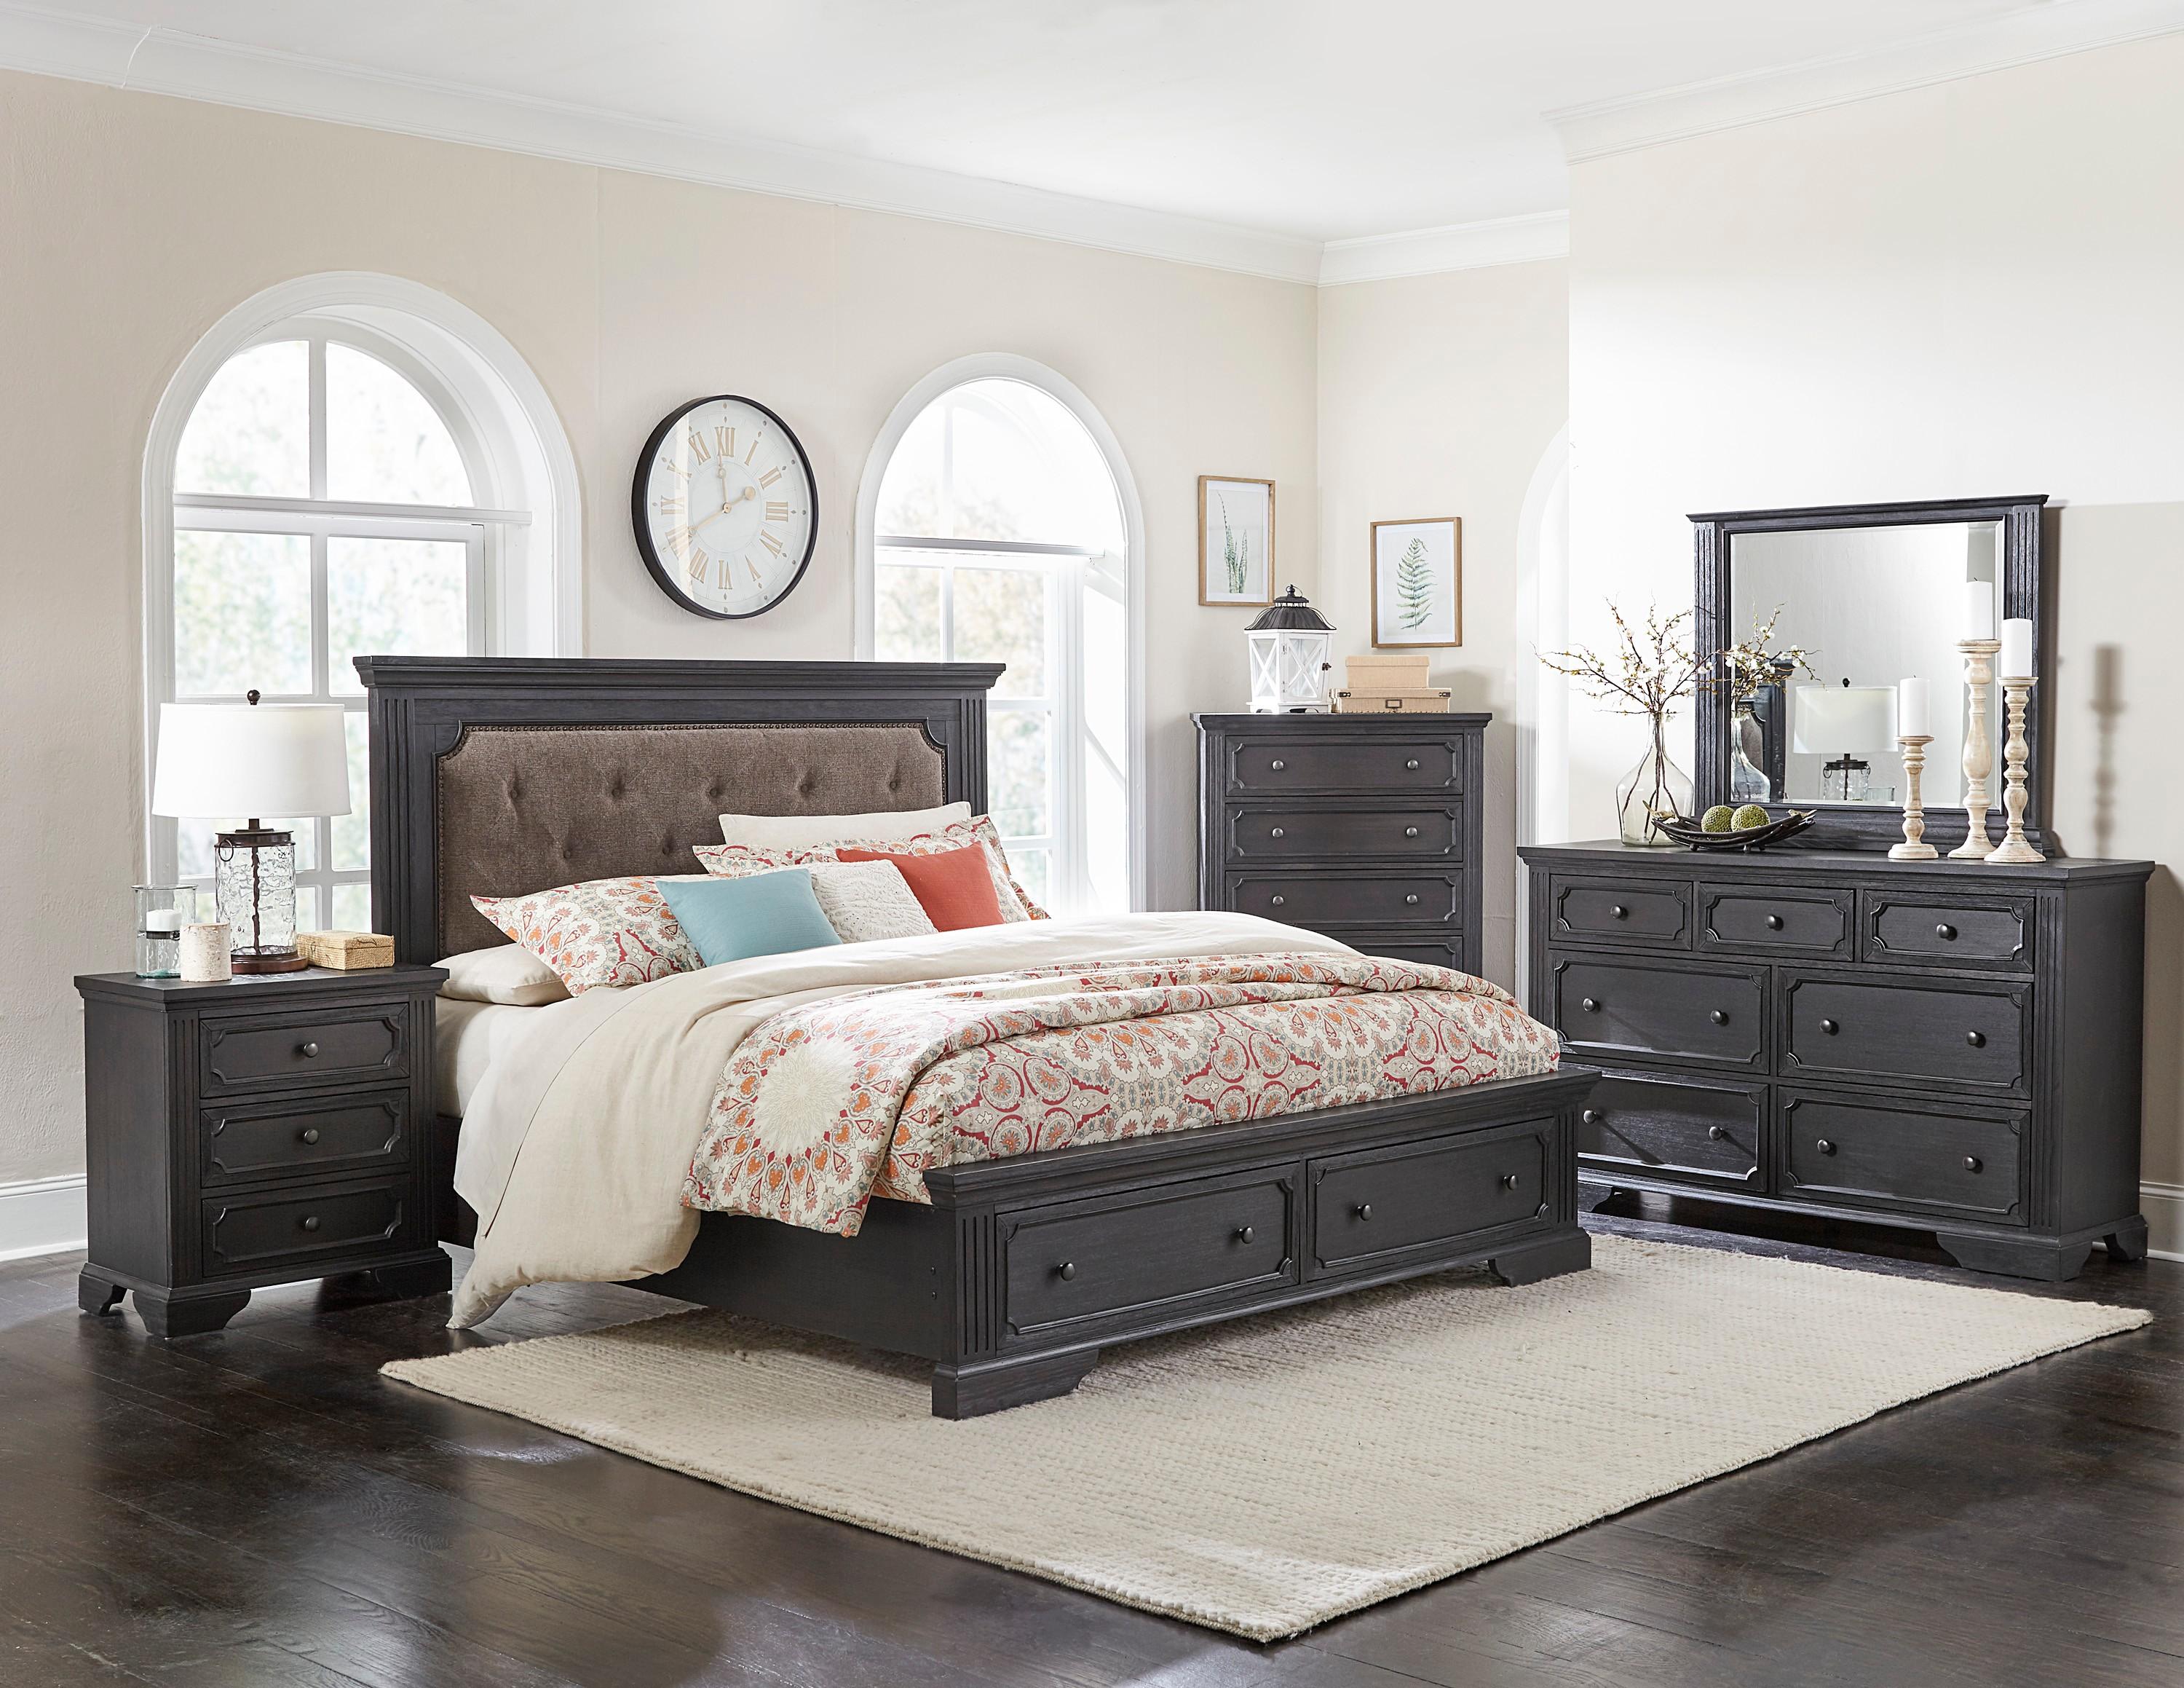 Rustic Bedroom Set 1647K-1CK-5PC Bolingbrook 1647K-1CK-5PC in Charcoal Polyester